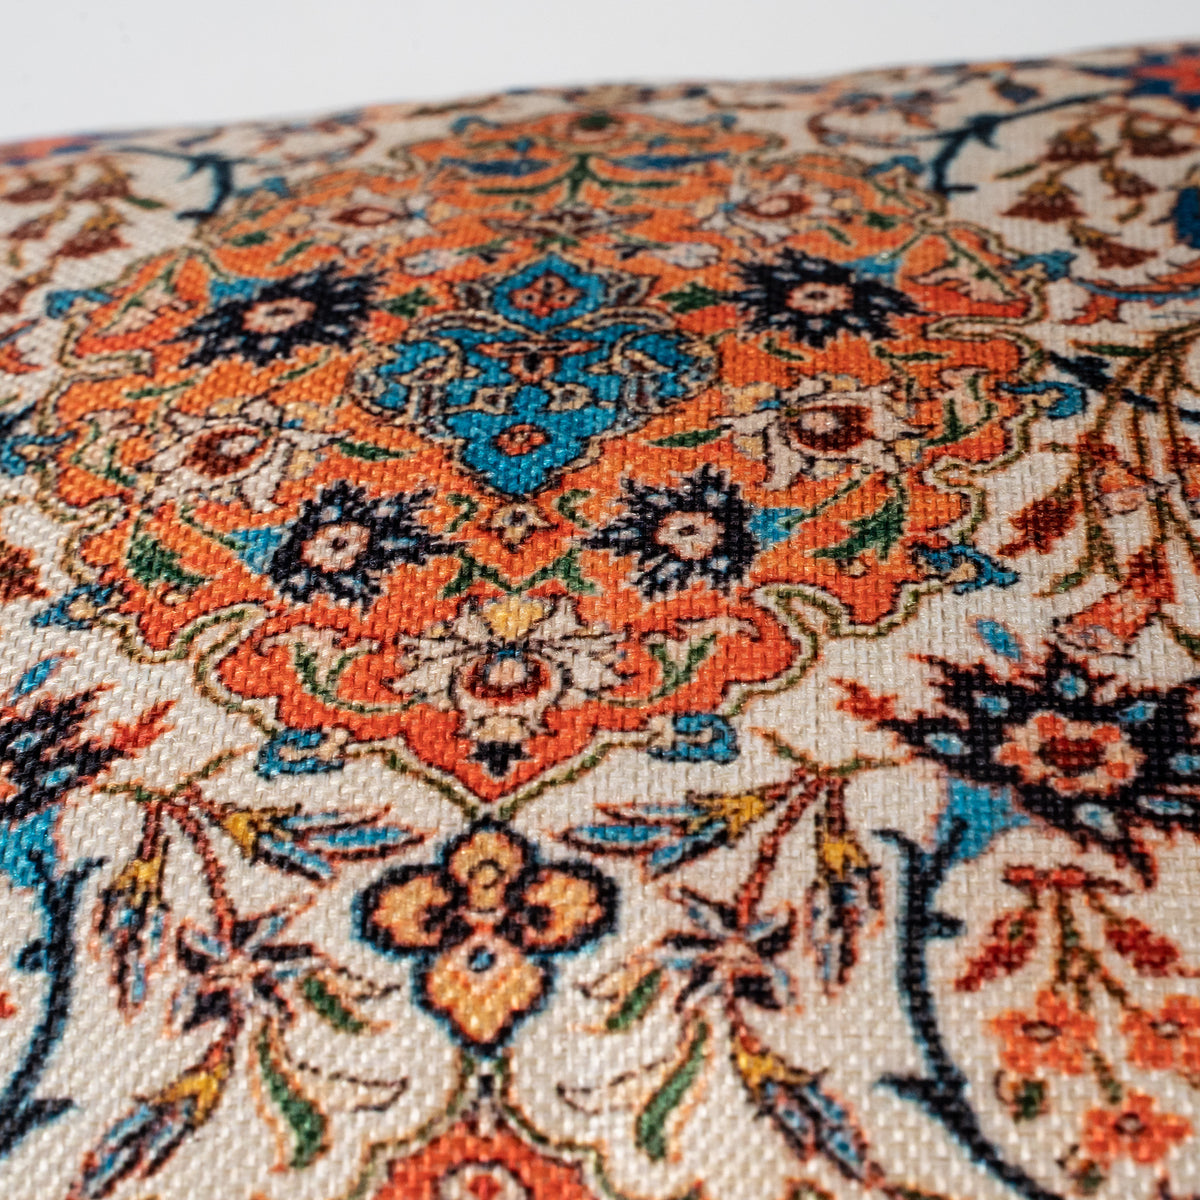 Bohemian Style Pillow - Isfahan Antique Central Persian Rug Print Linen Case